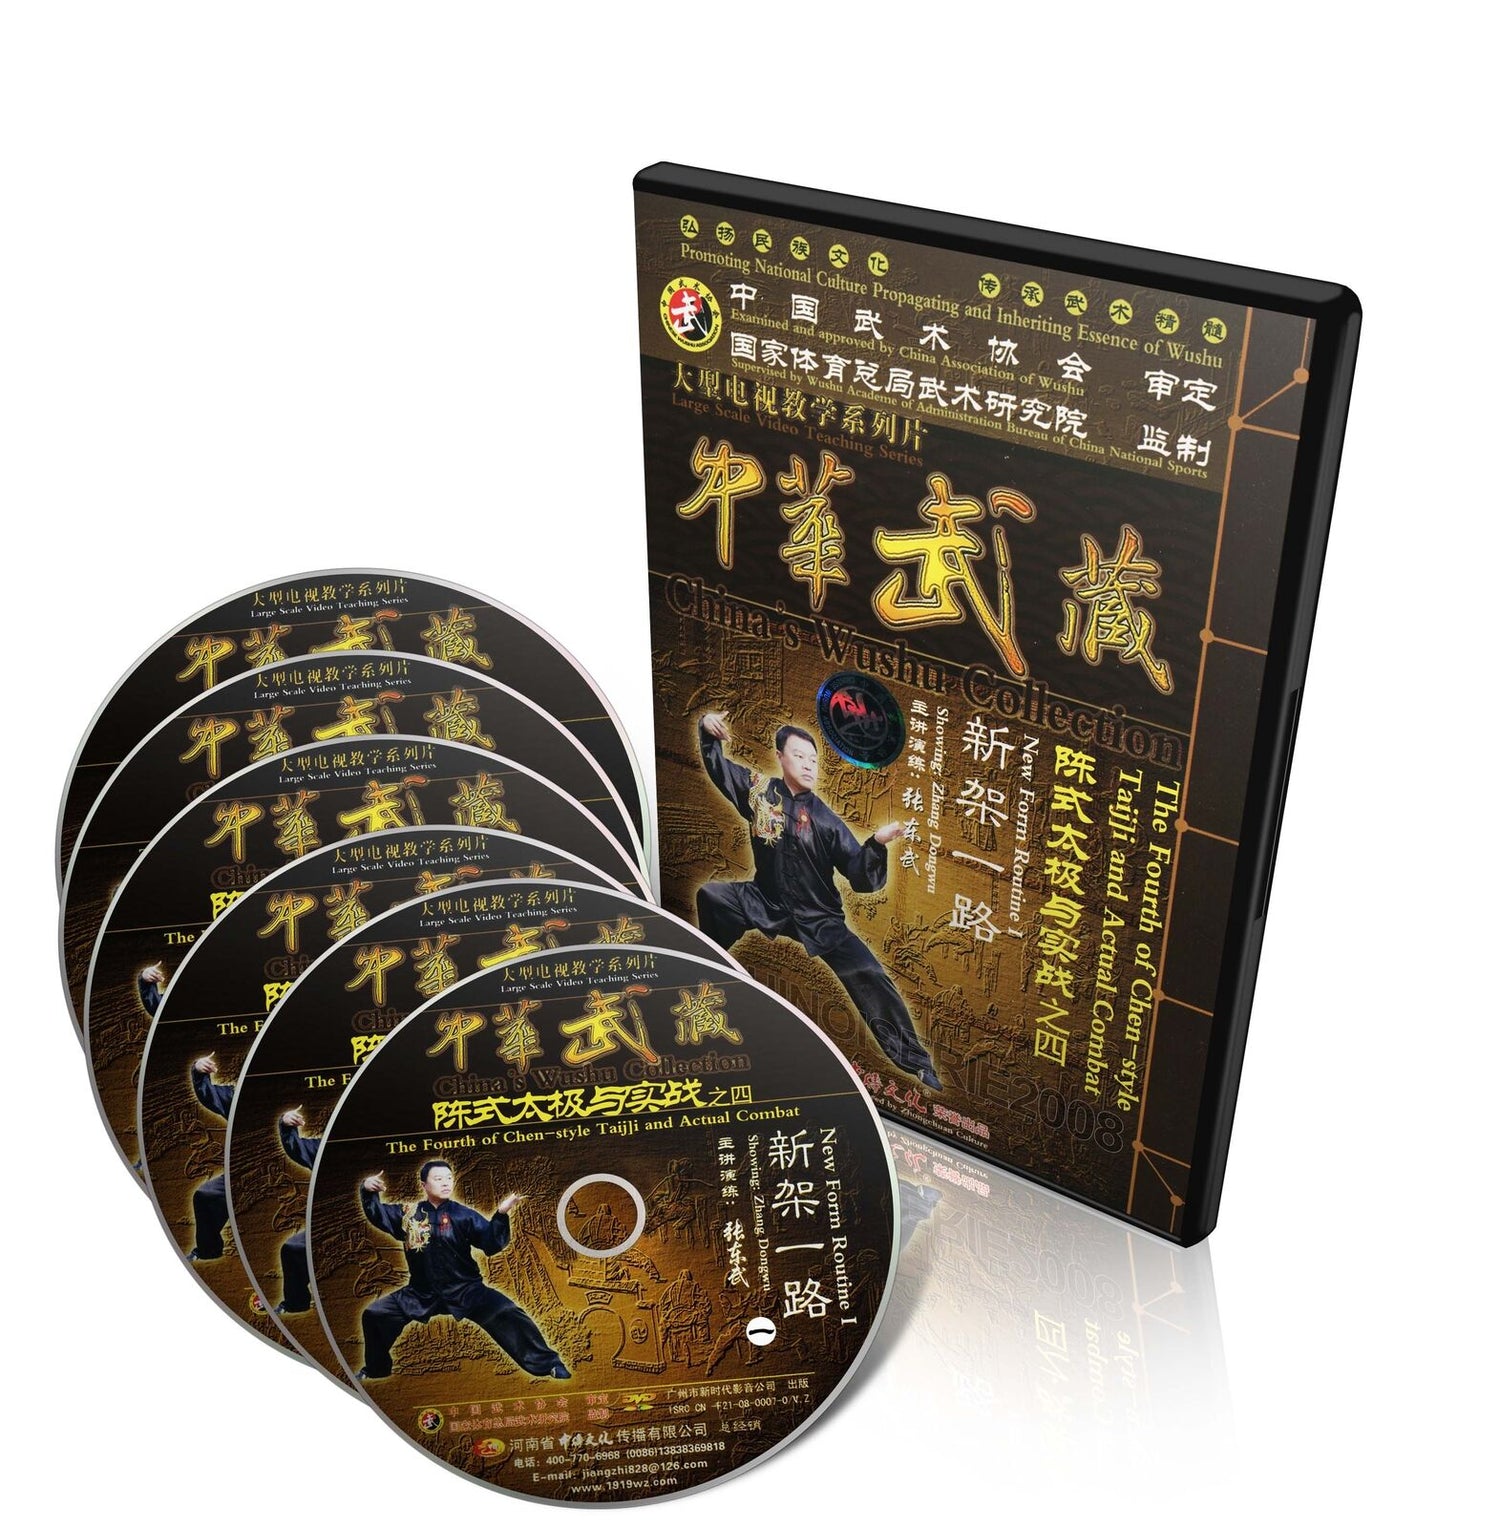 Chen Style Taichi and Actual Combat (New Form Routine I) 6 DVD Set by Zhang Dongwu